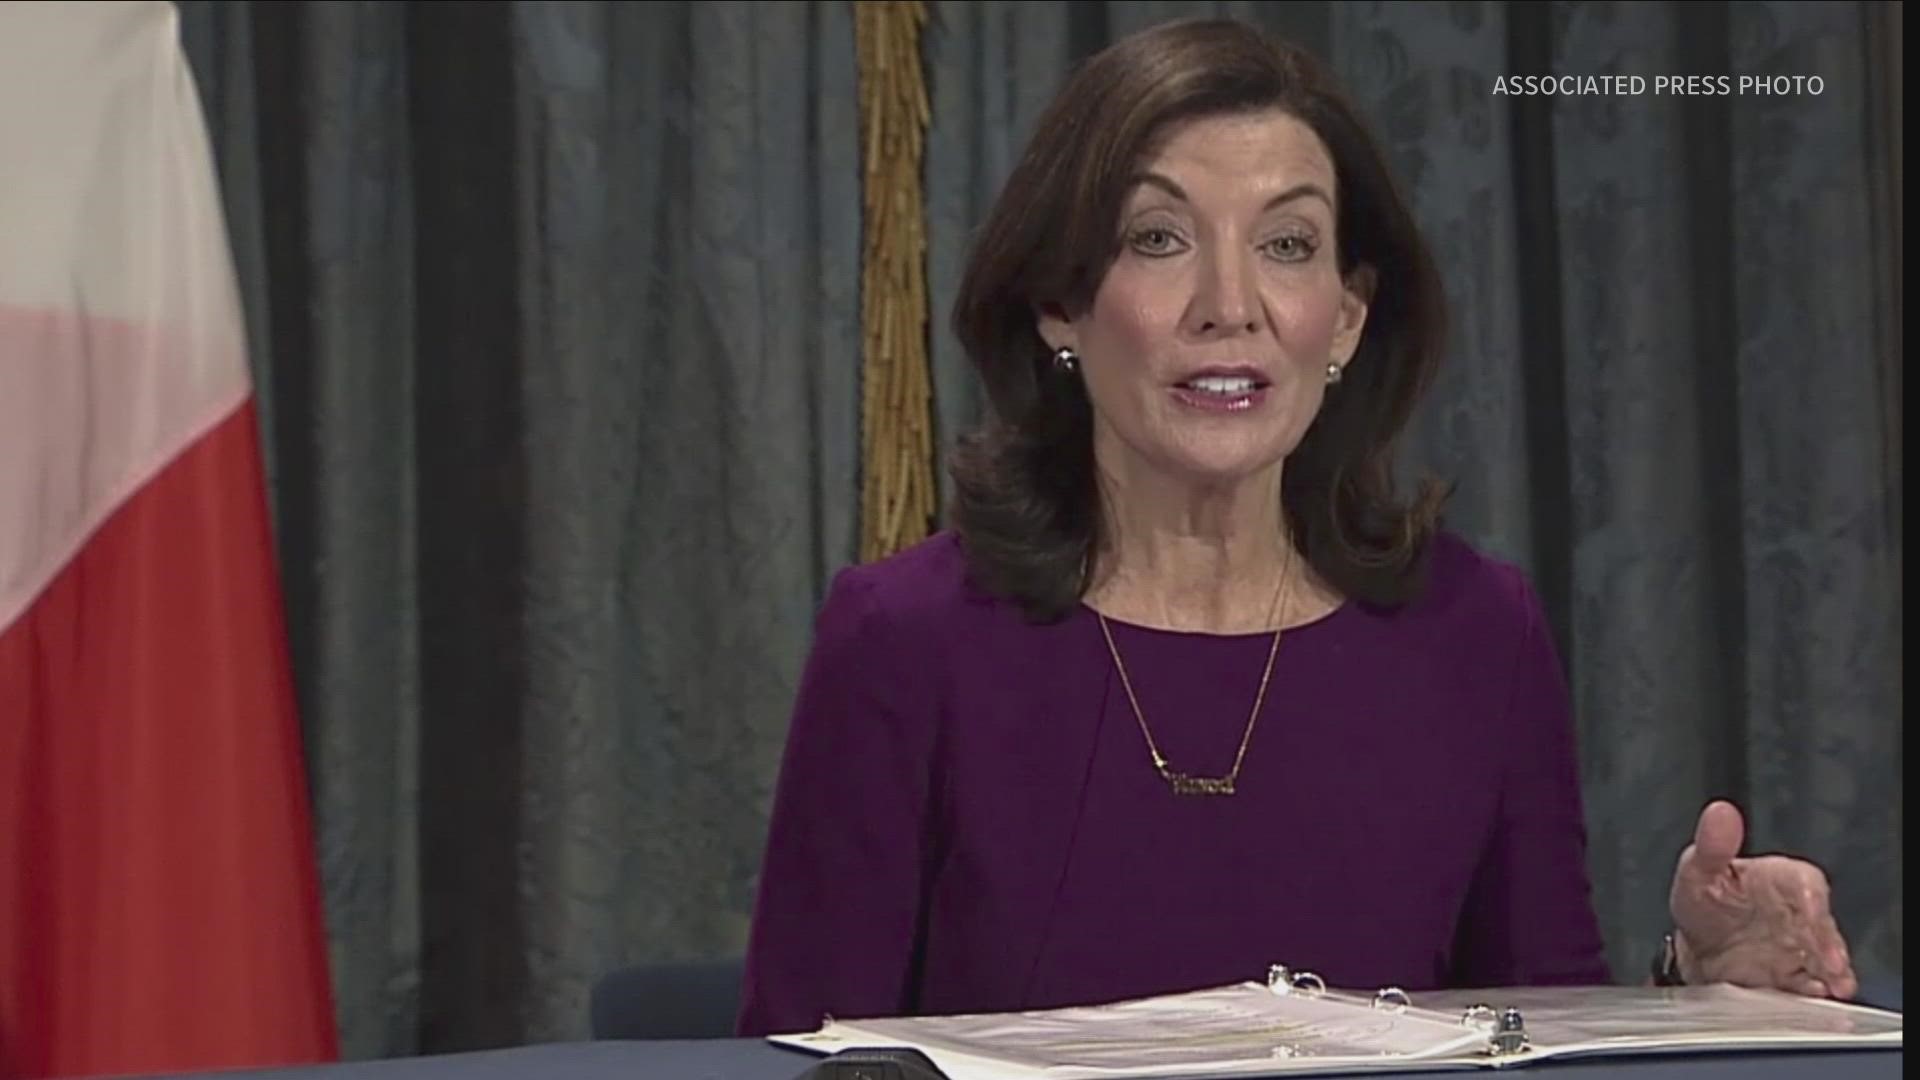 This summer, Gov. Kathy Hochul announced an outside firm would be hired for an "after action review" on the state's response to the COVID pandemic.